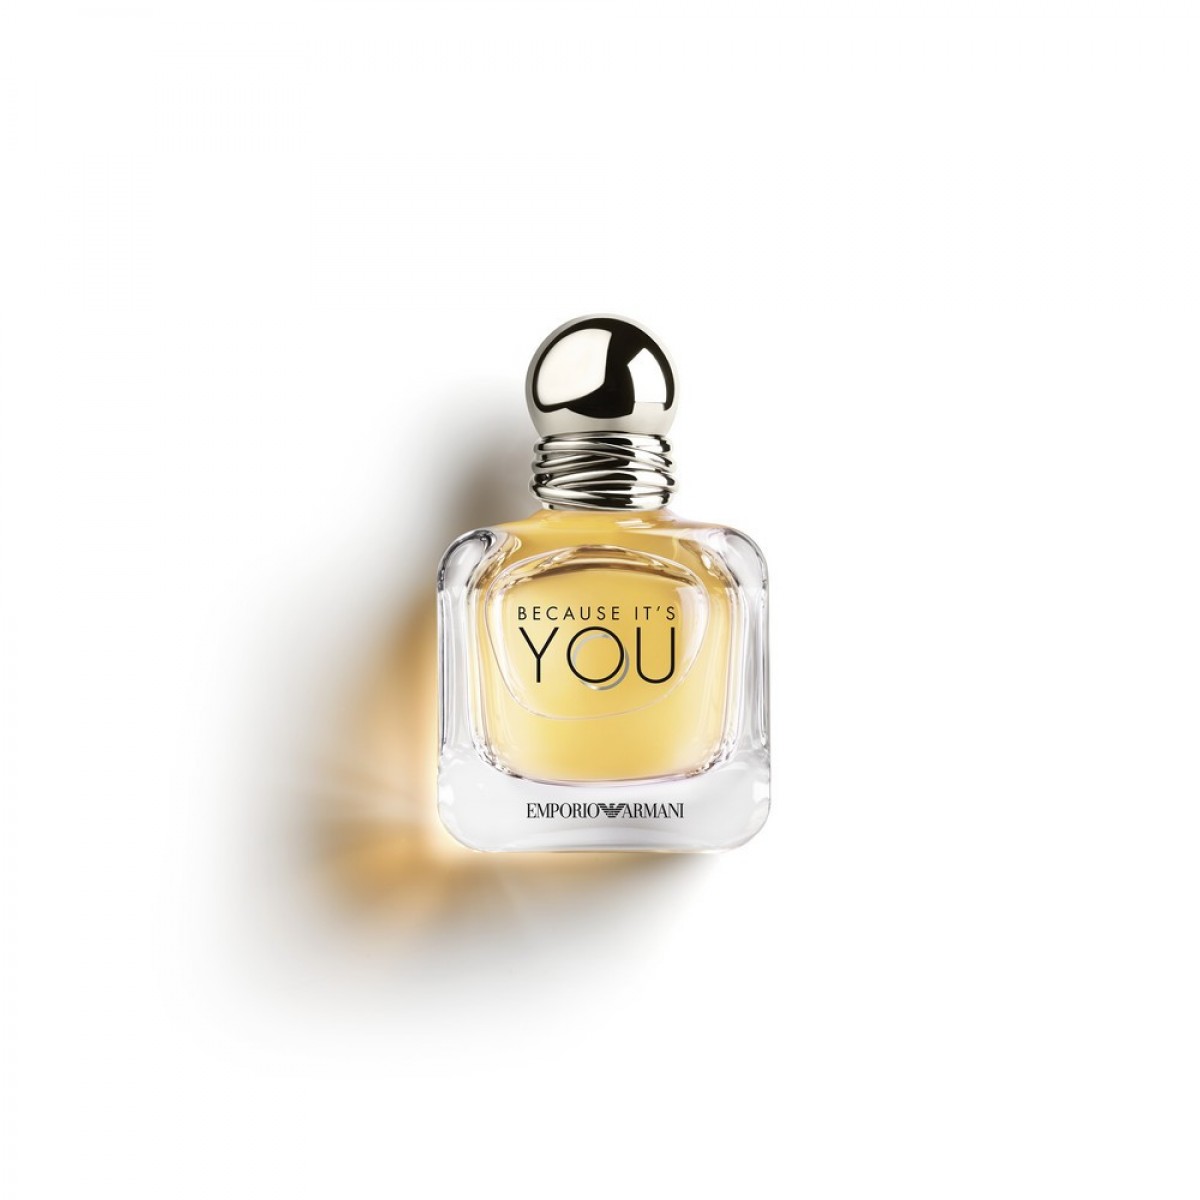 Emporio Armani Stronger With You, Because it's You